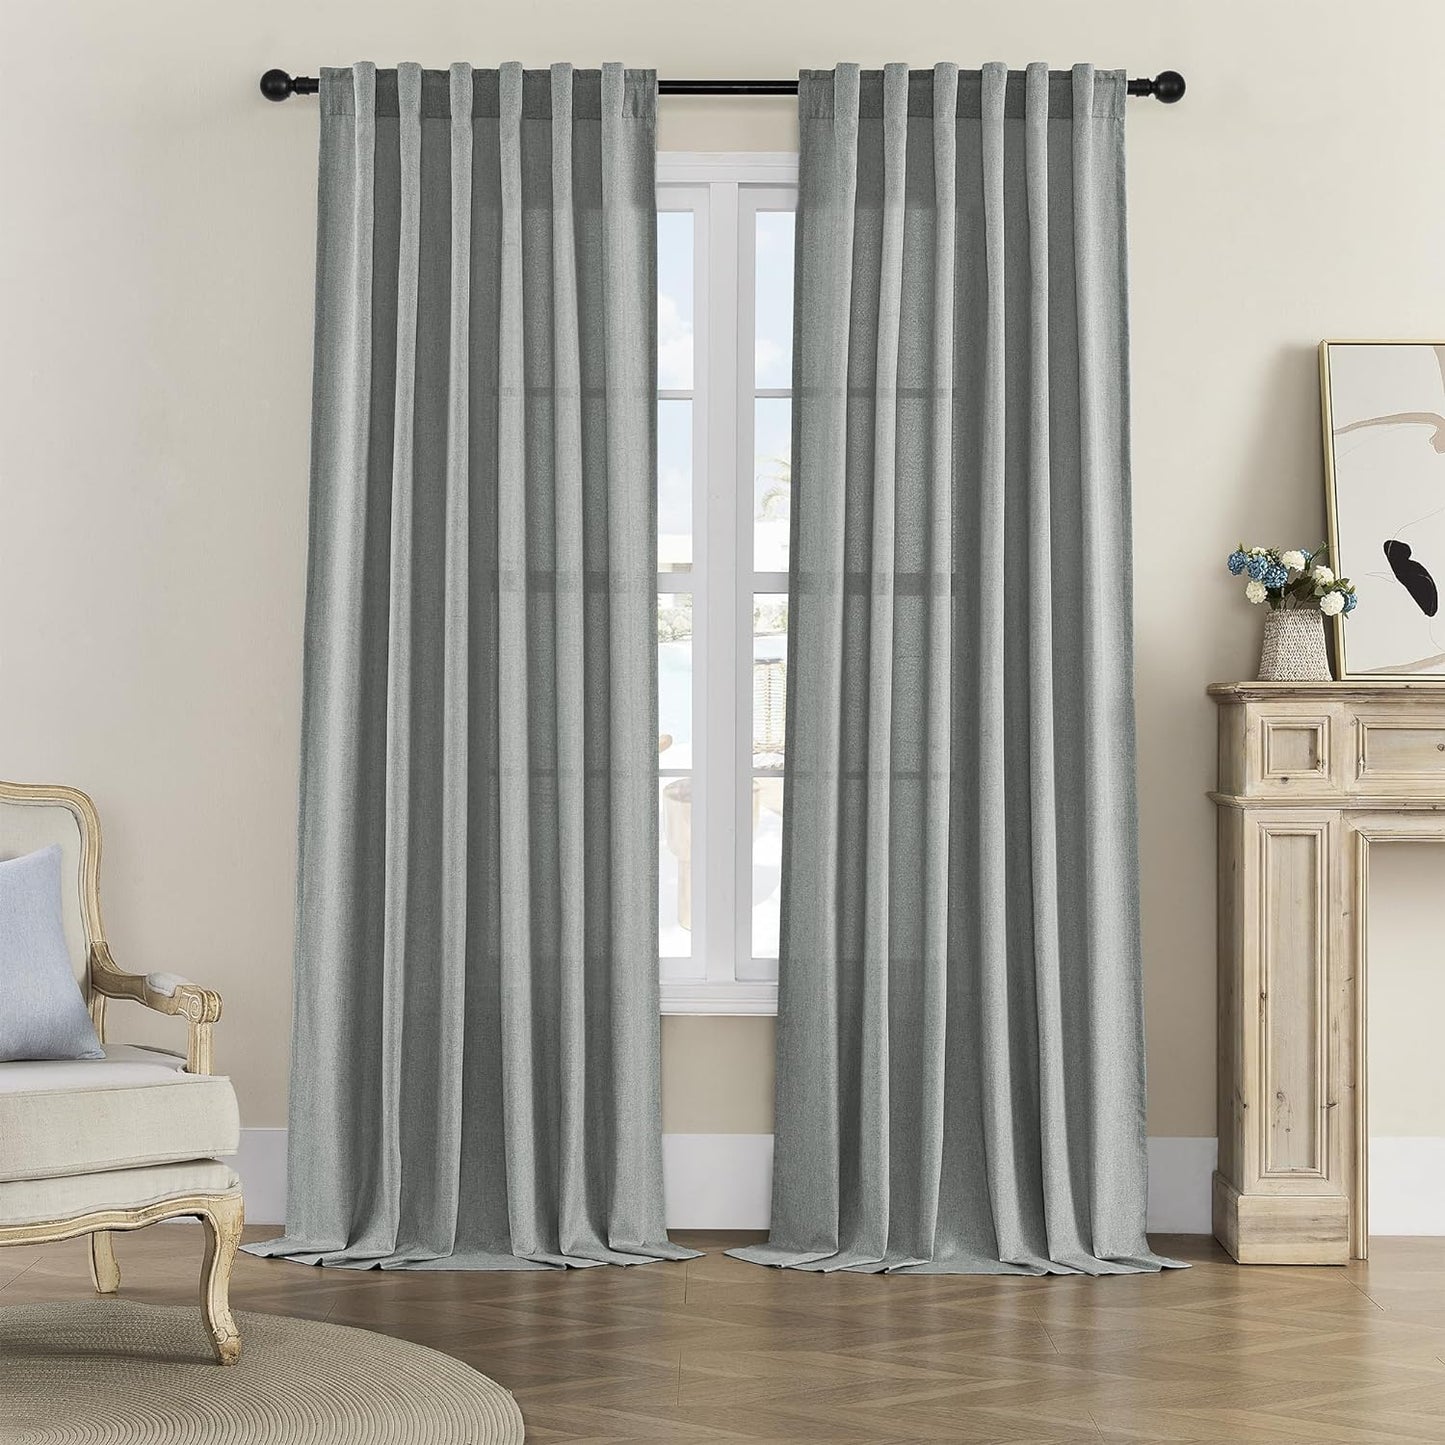 Linen Sheer Window Curtains, Rod Pocket & Back Tab Modern Semi Sheer Panels Privacy with Light Filter Linen Drapes for Sliding Glass Door/Living Room, W60 X L84, 2 Pieces  DONREN Dove Grey 50X120 